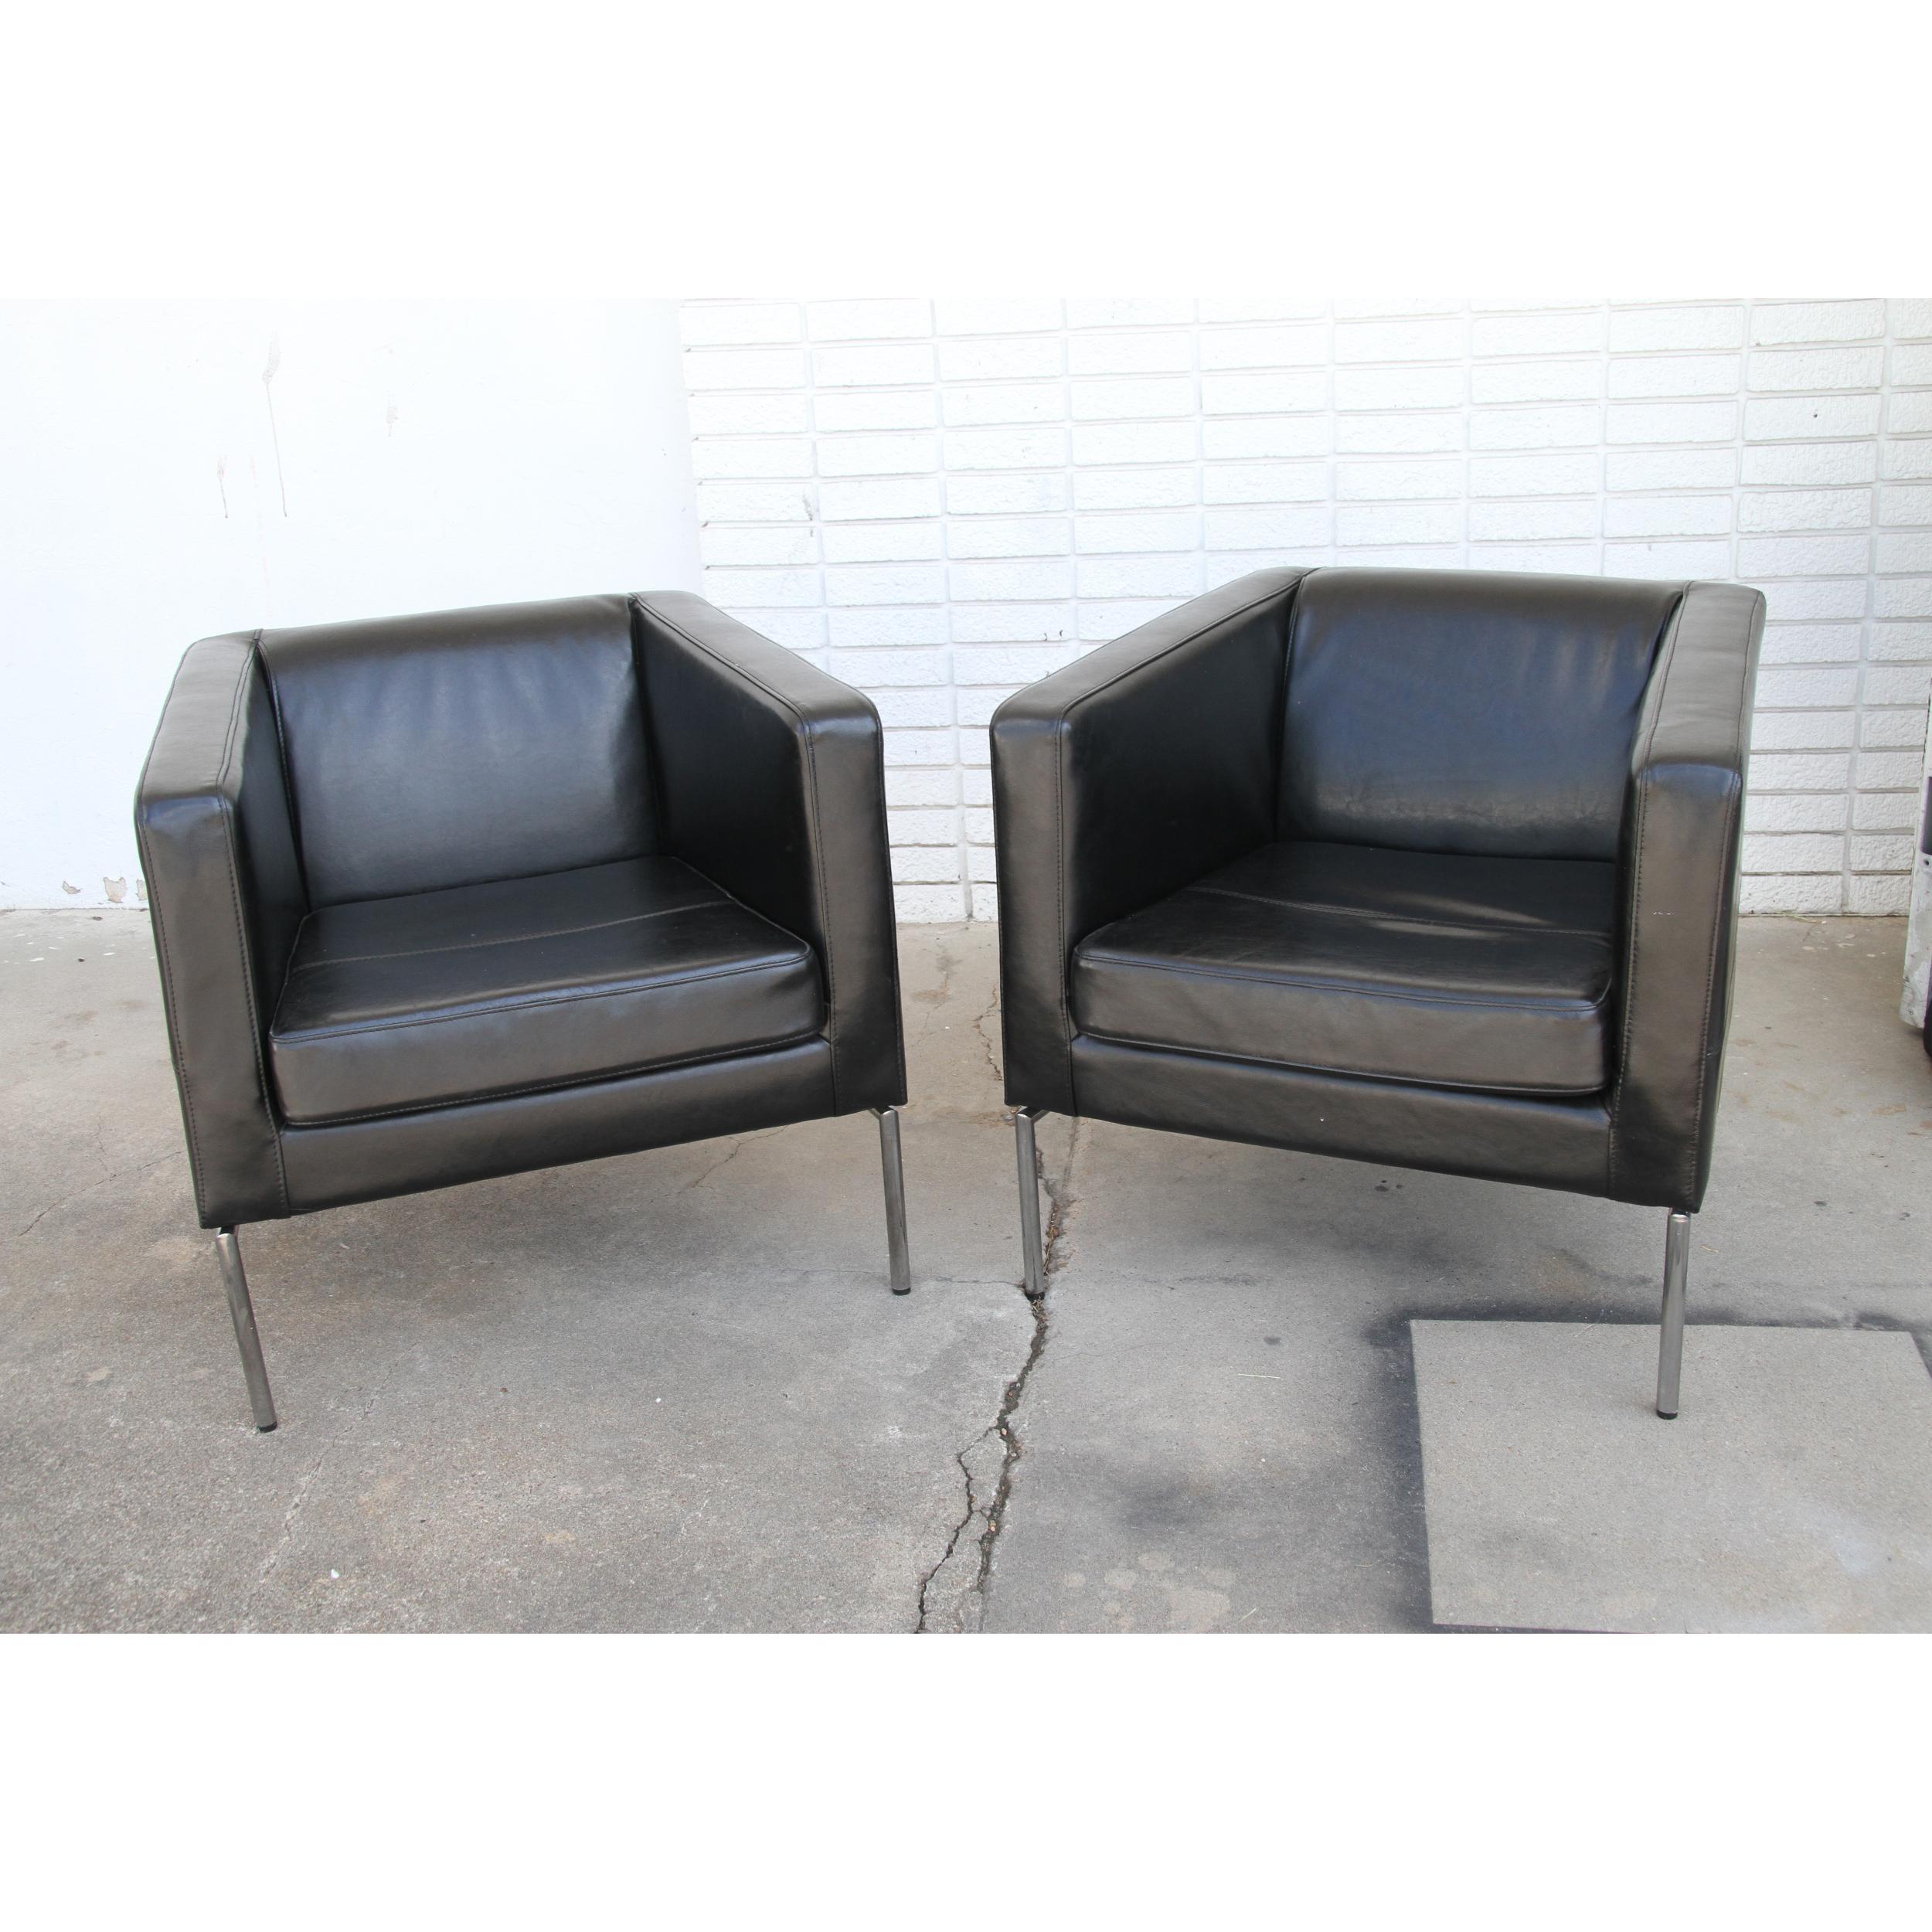 Black Leather Club Chairs upholstered in black leather with chrome legs and base.
A beautiful addition to any room.